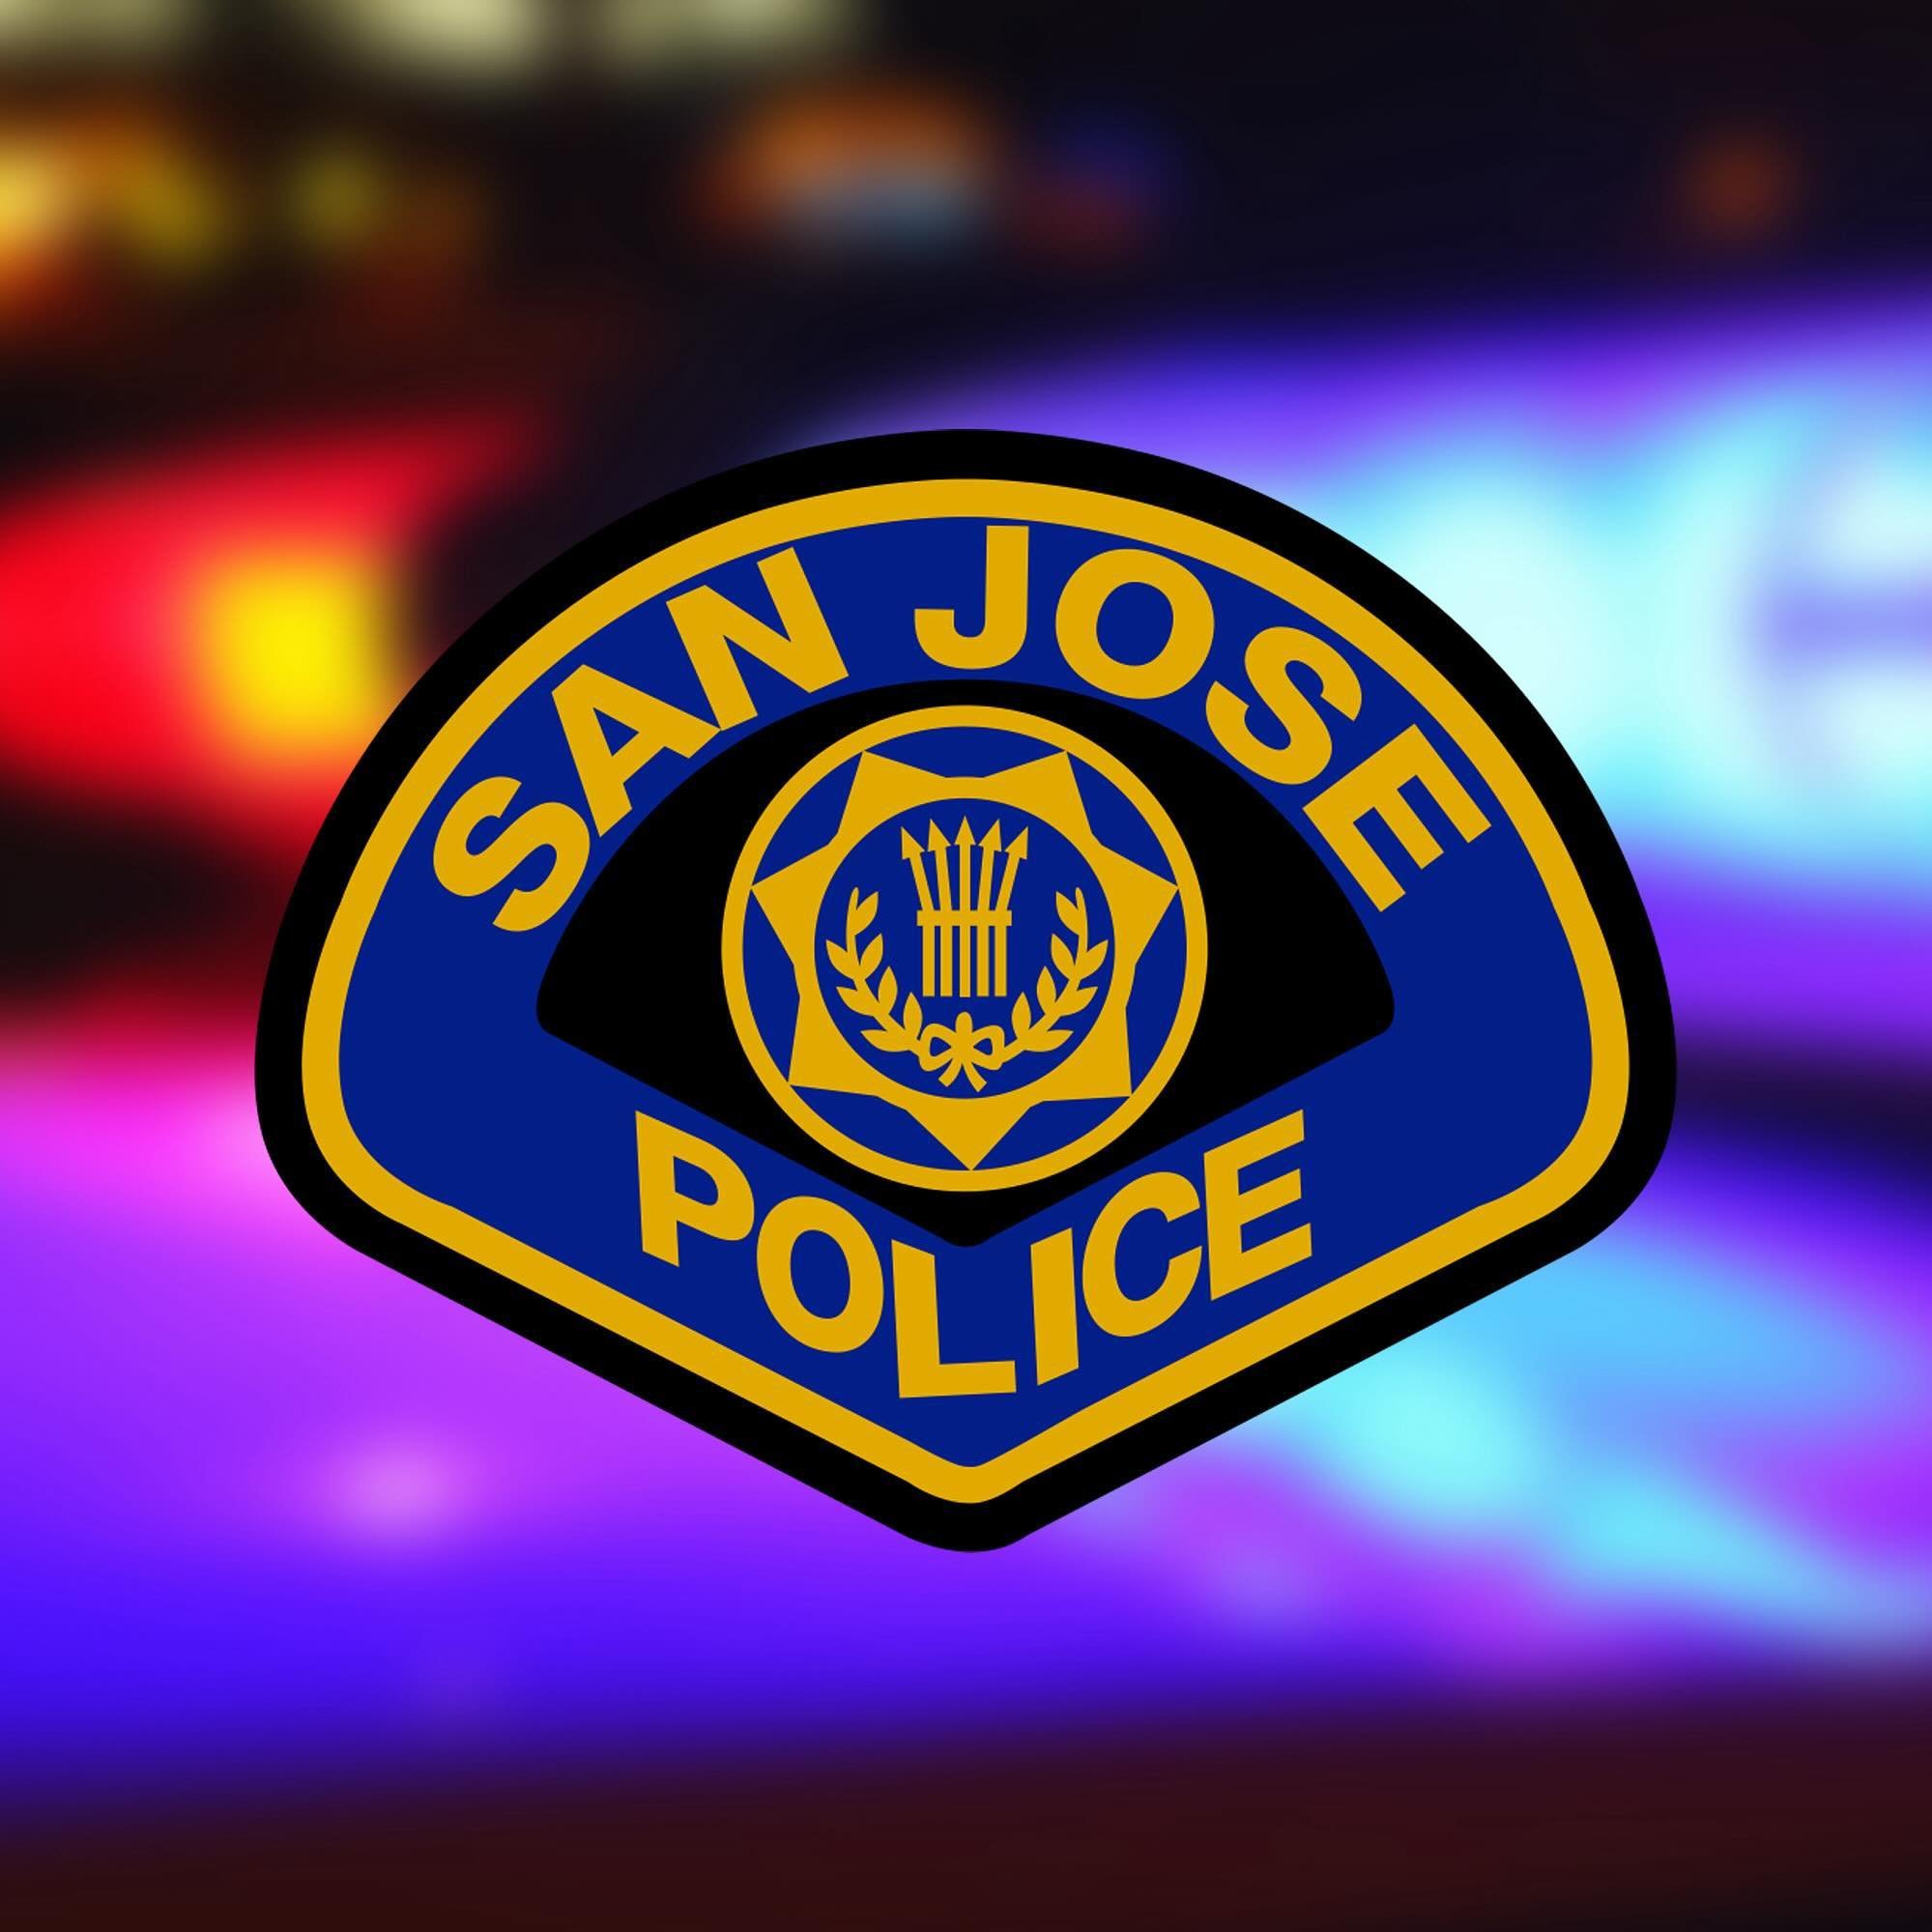 Let&rsquo;s come together in support of the two San Jose Police Department officers who were injured in the line of duty yesterday. Please join me in keeping these officers and their families in our thoughts as we wish them a swift and complete recov